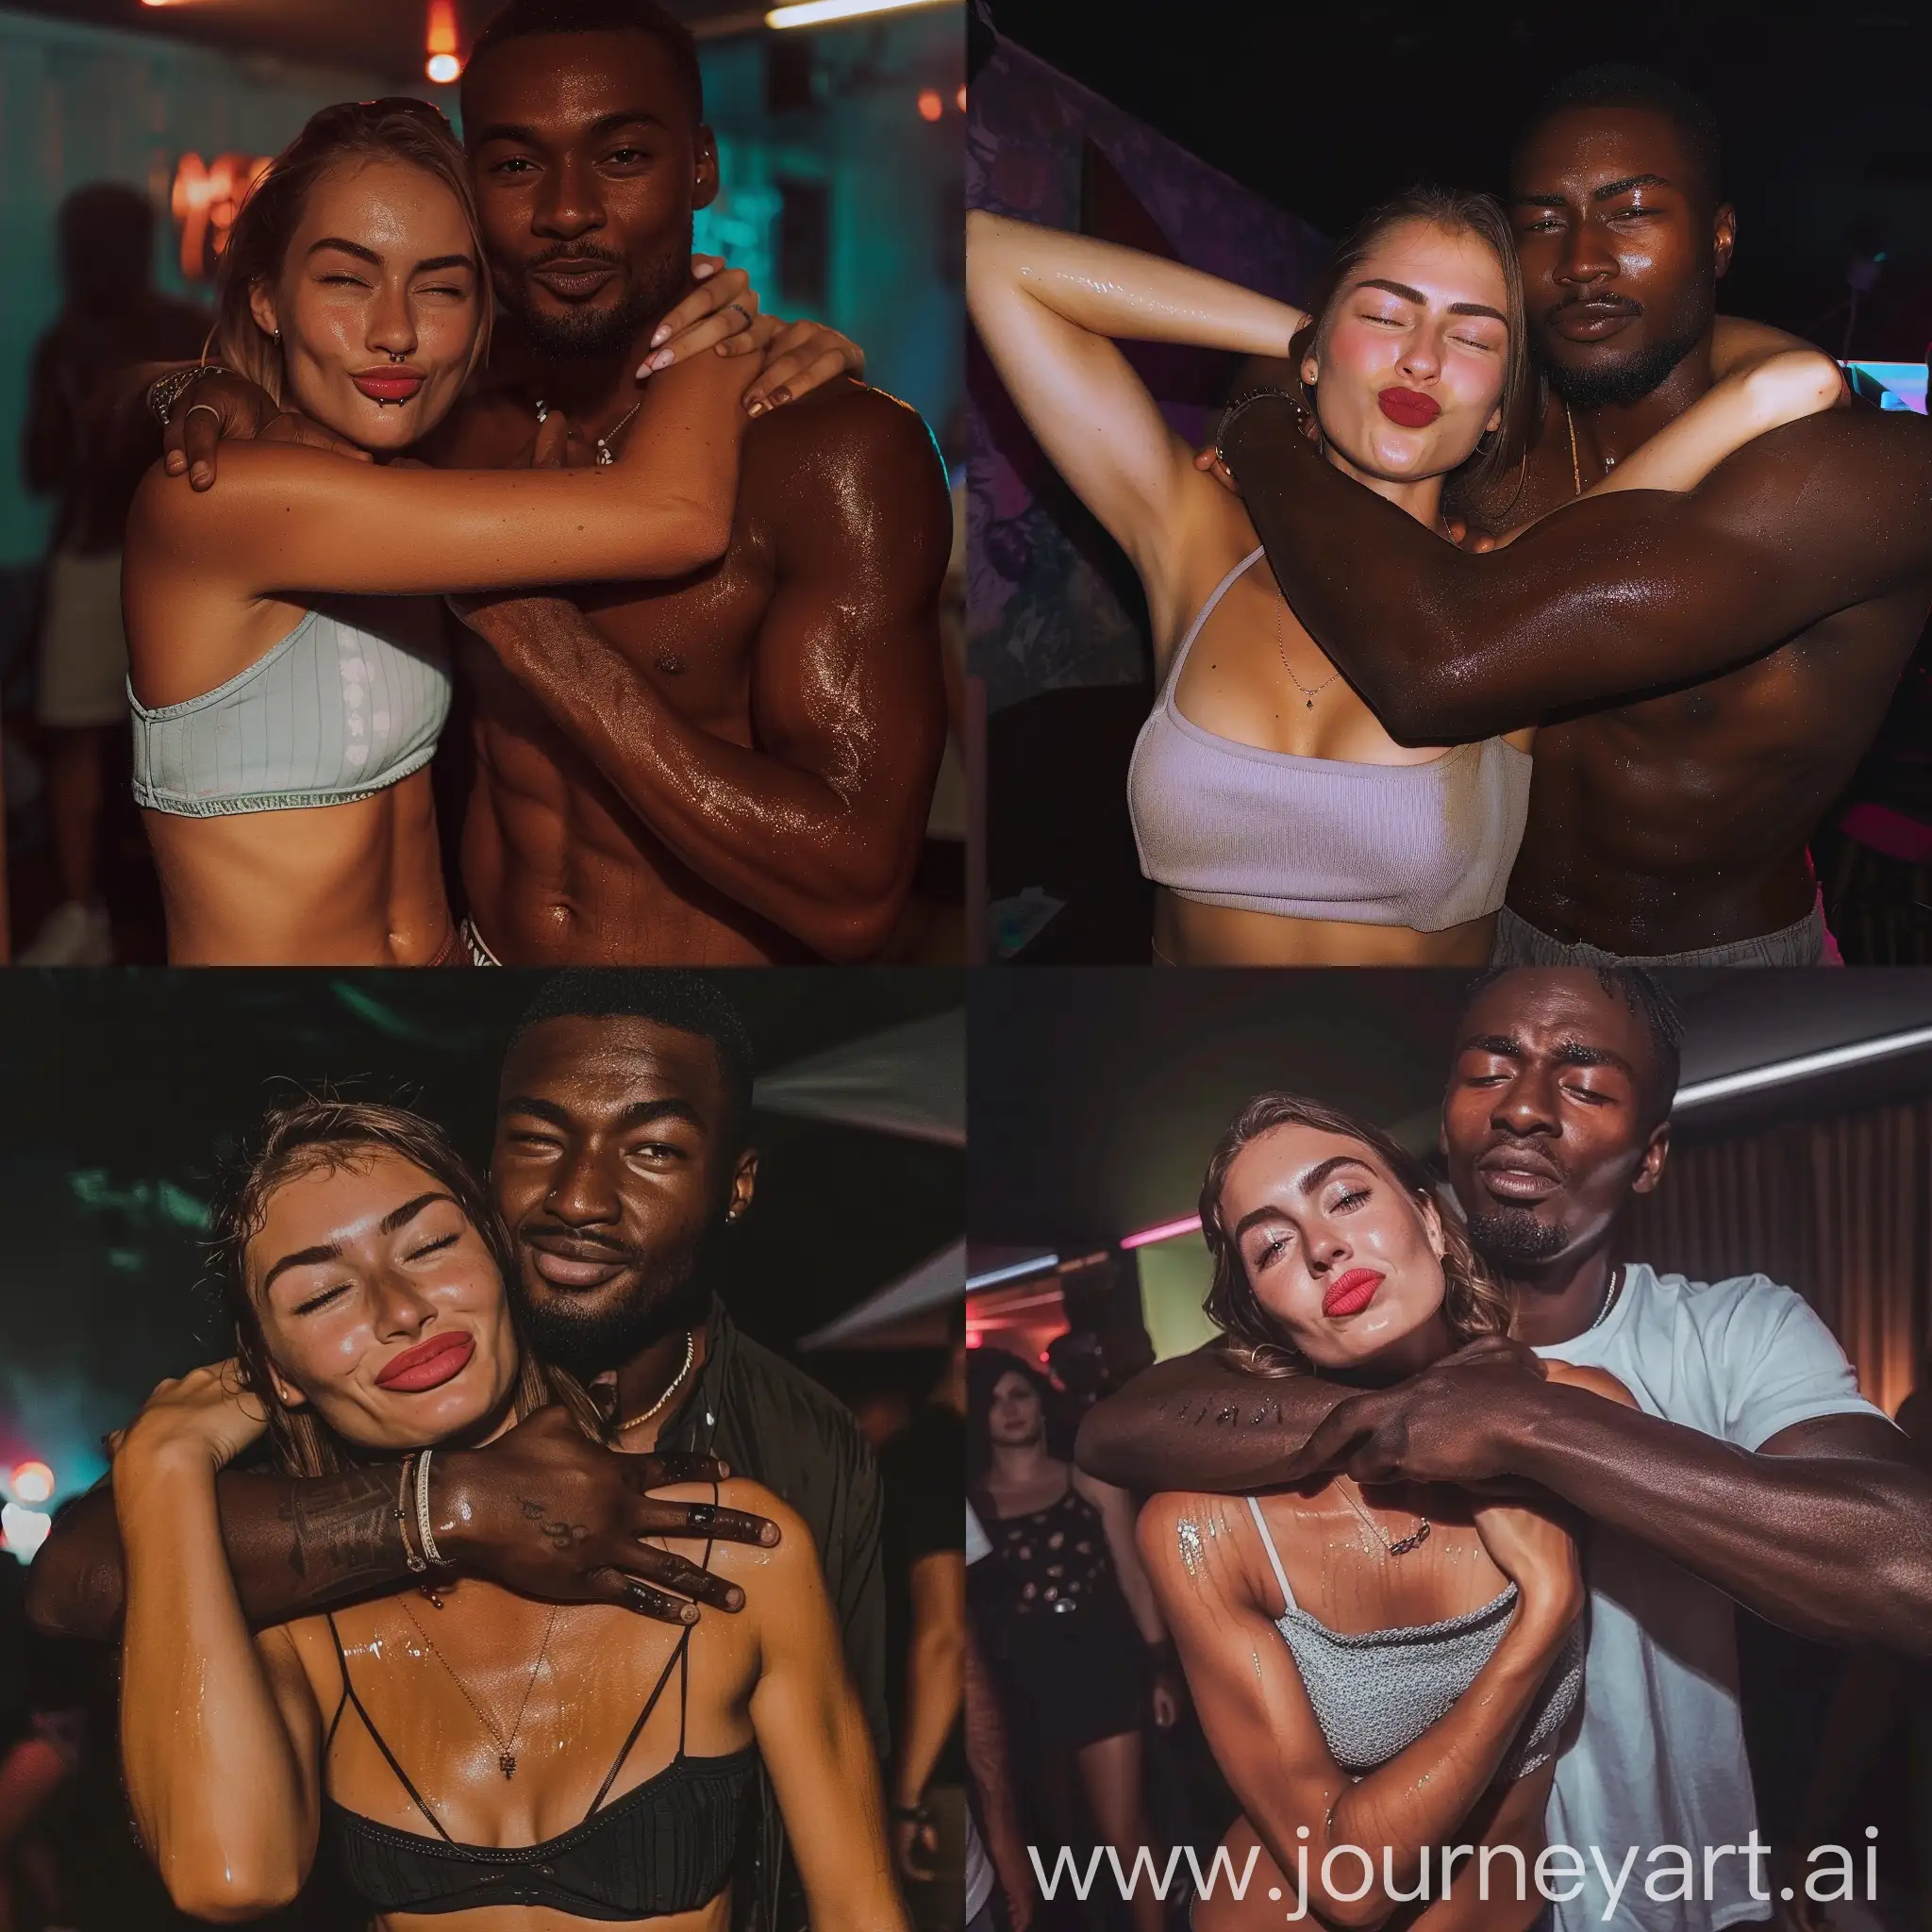 Aesthetic instagram selfie of a German woman in a party club crop-top being possessively hugged by her tall robust African partner, she is doing the duck lips pose, her partner is grabbing her neck and smiling, the woman looks typically German and is beautiful, both are looking at the camera, sweaty, flirty